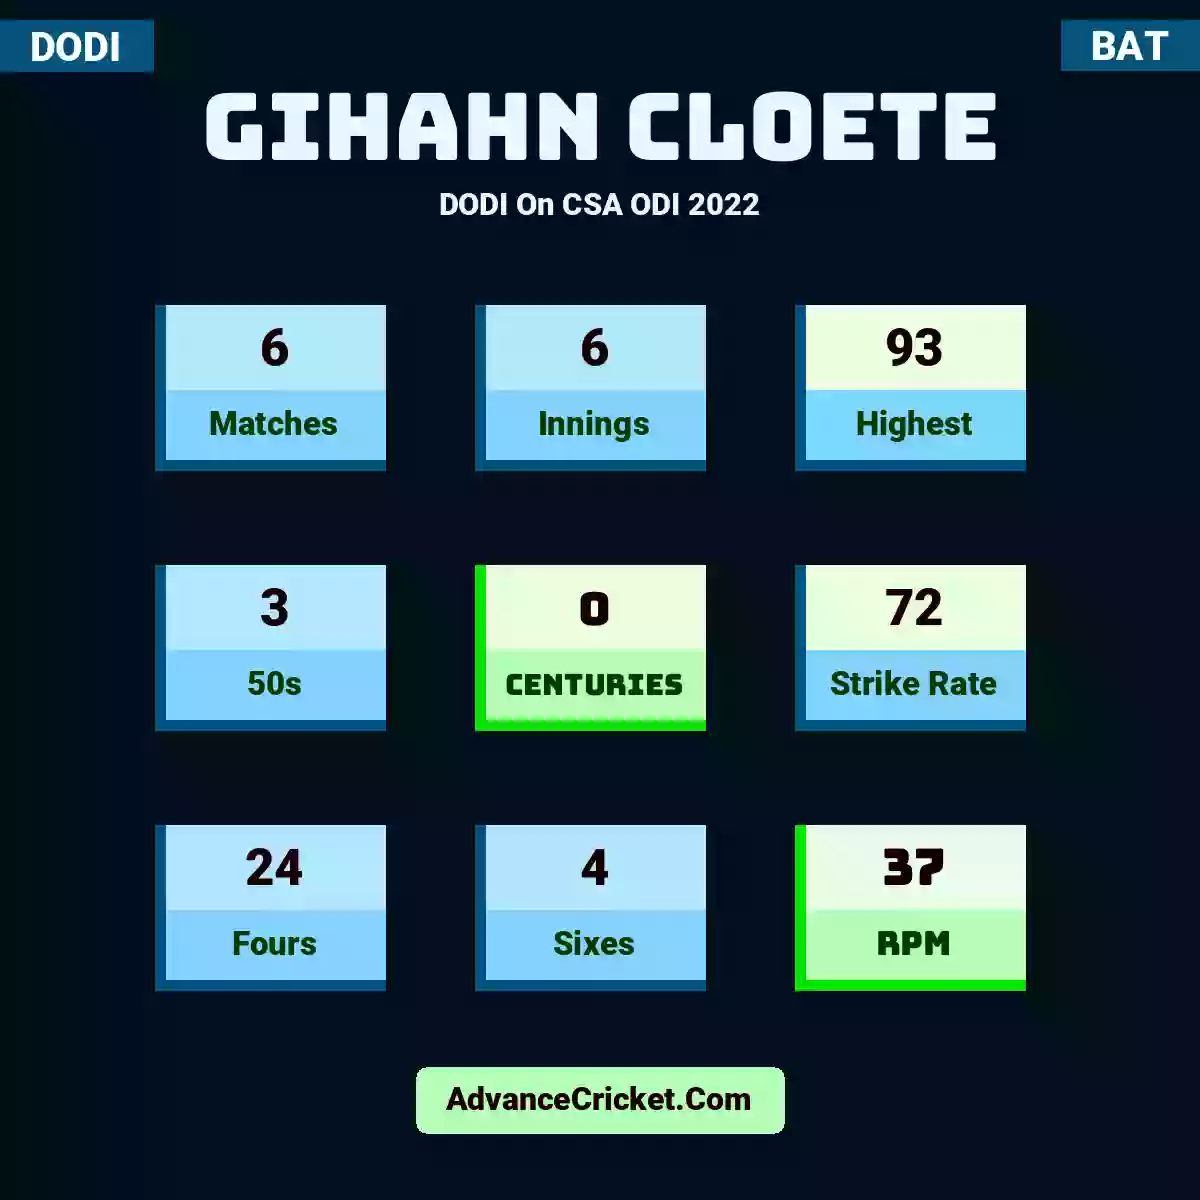 Gihahn Cloete DODI  On CSA ODI 2022, Gihahn Cloete played 6 matches, scored 93 runs as highest, 3 half-centuries, and 0 centuries, with a strike rate of 72. G.Cloete hit 24 fours and 4 sixes, with an RPM of 37.